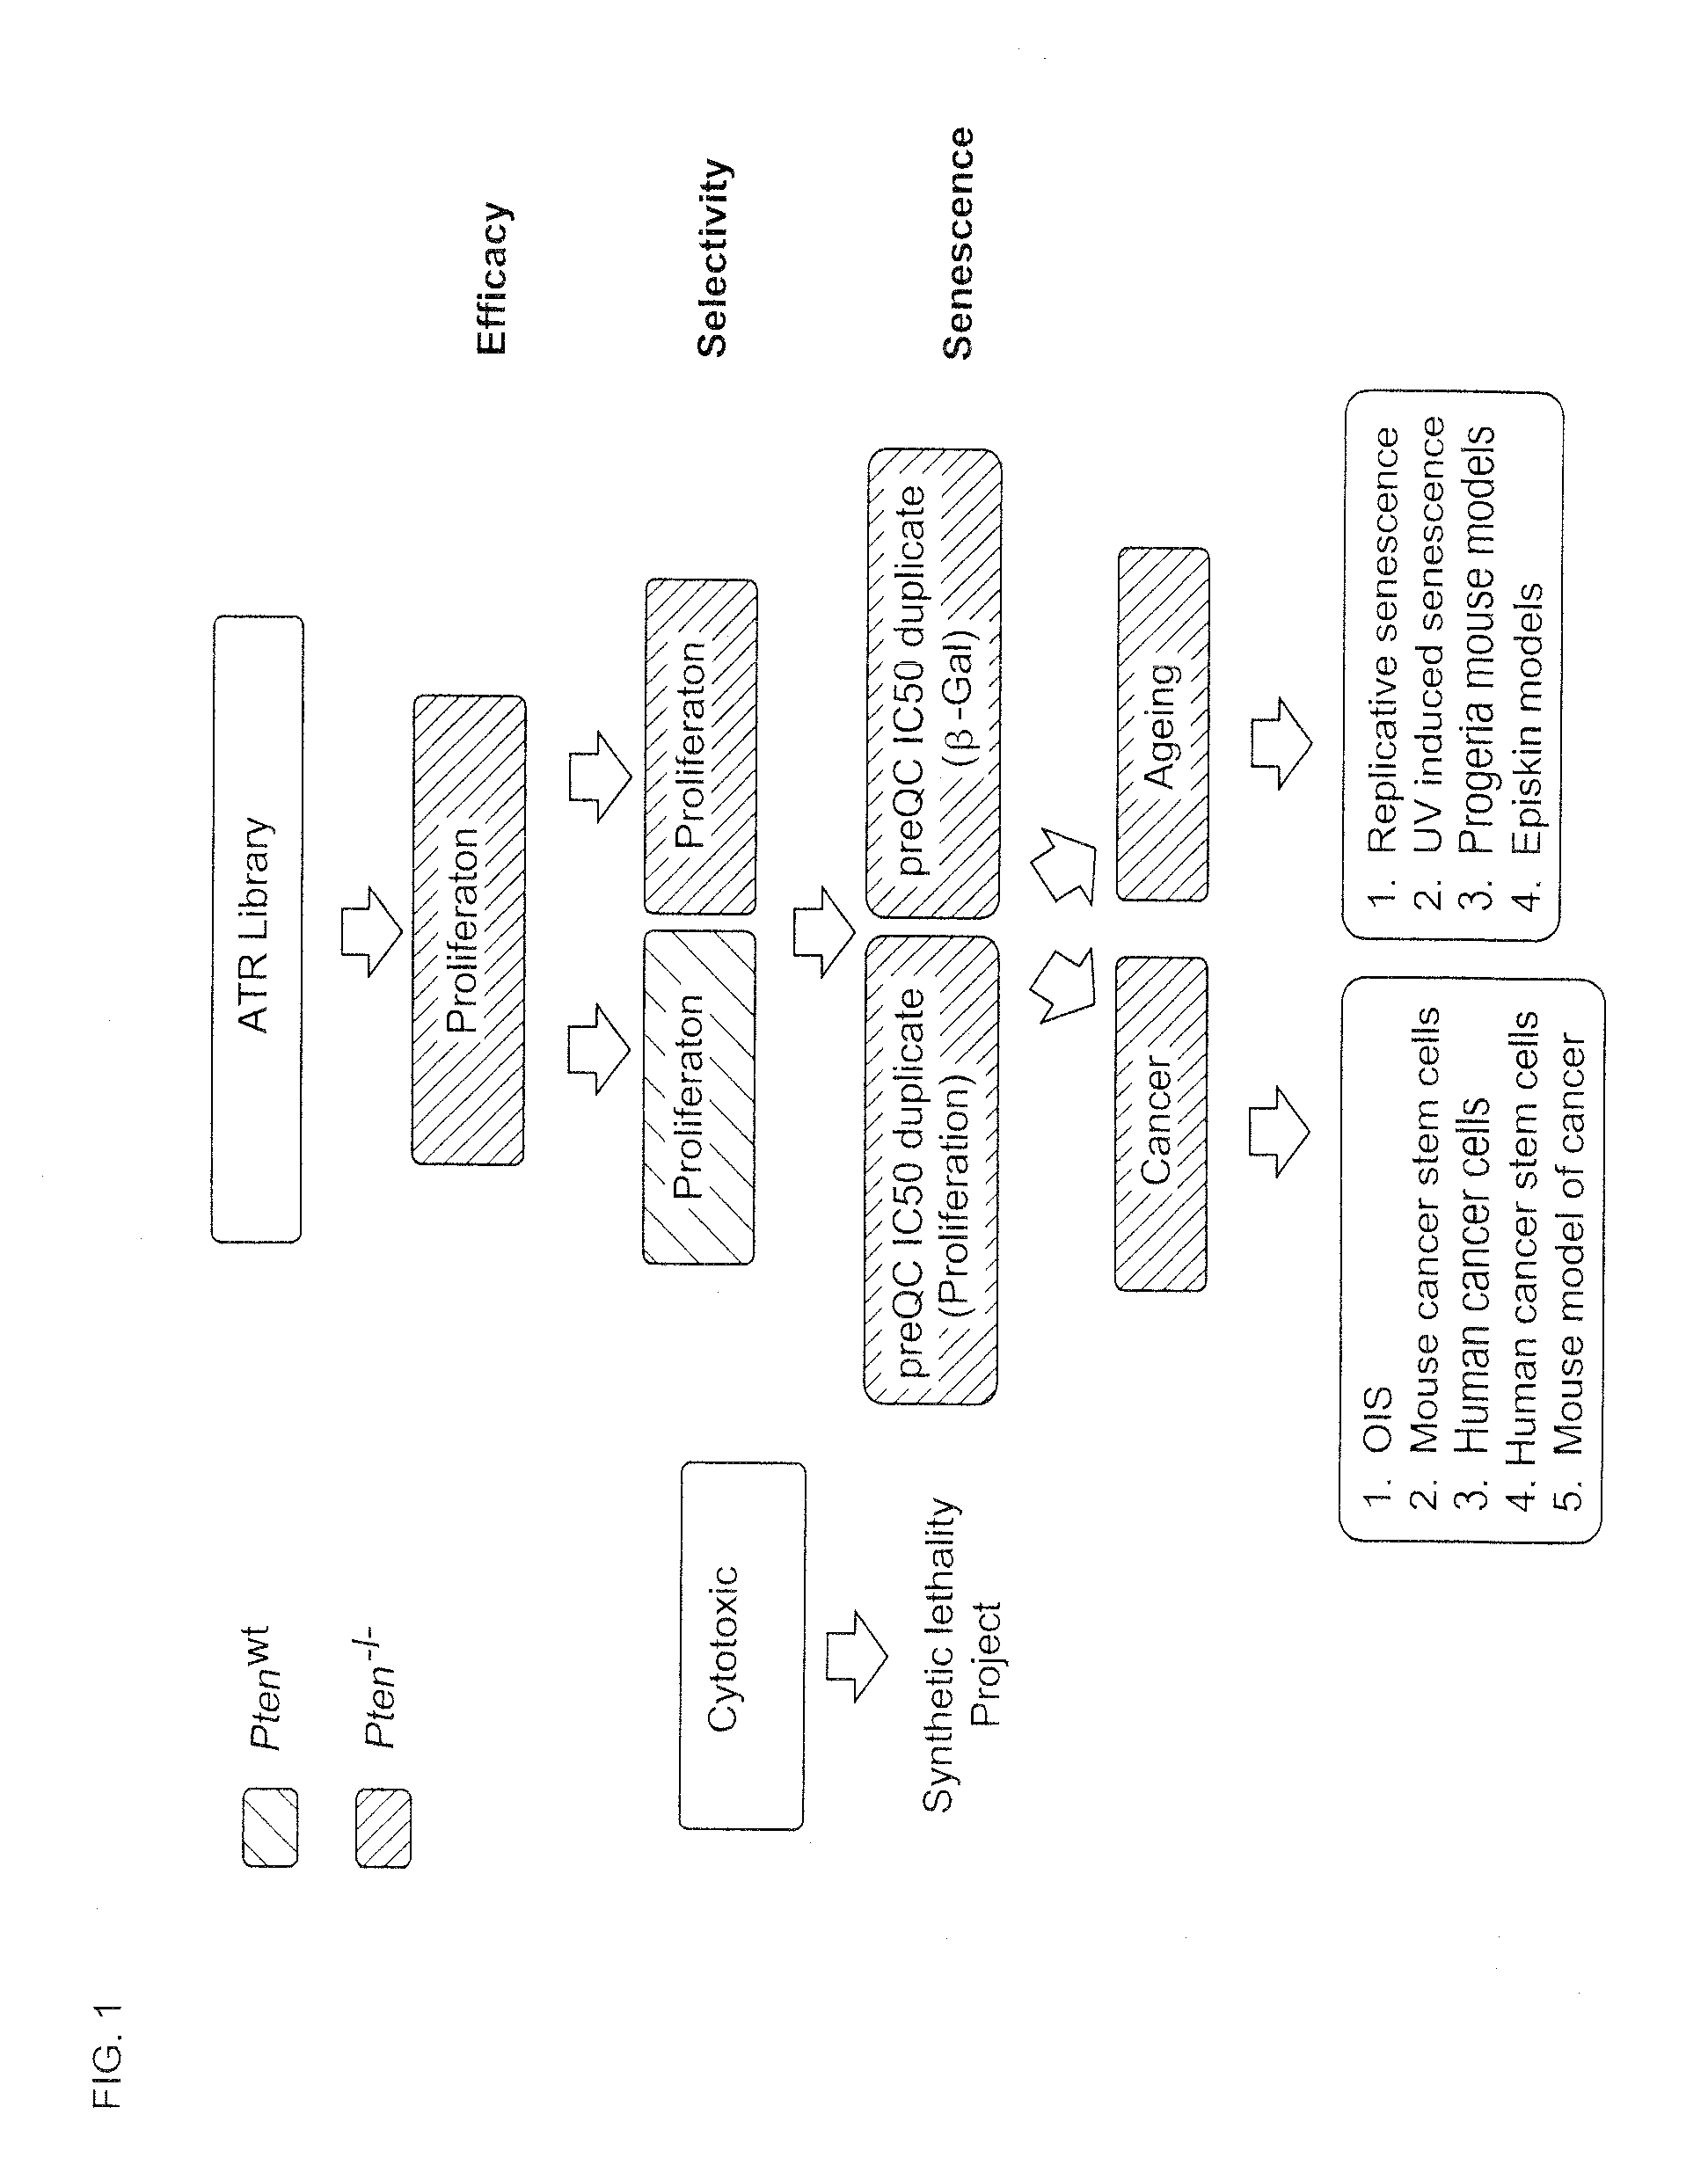 Screening method and substances for contrasting aging